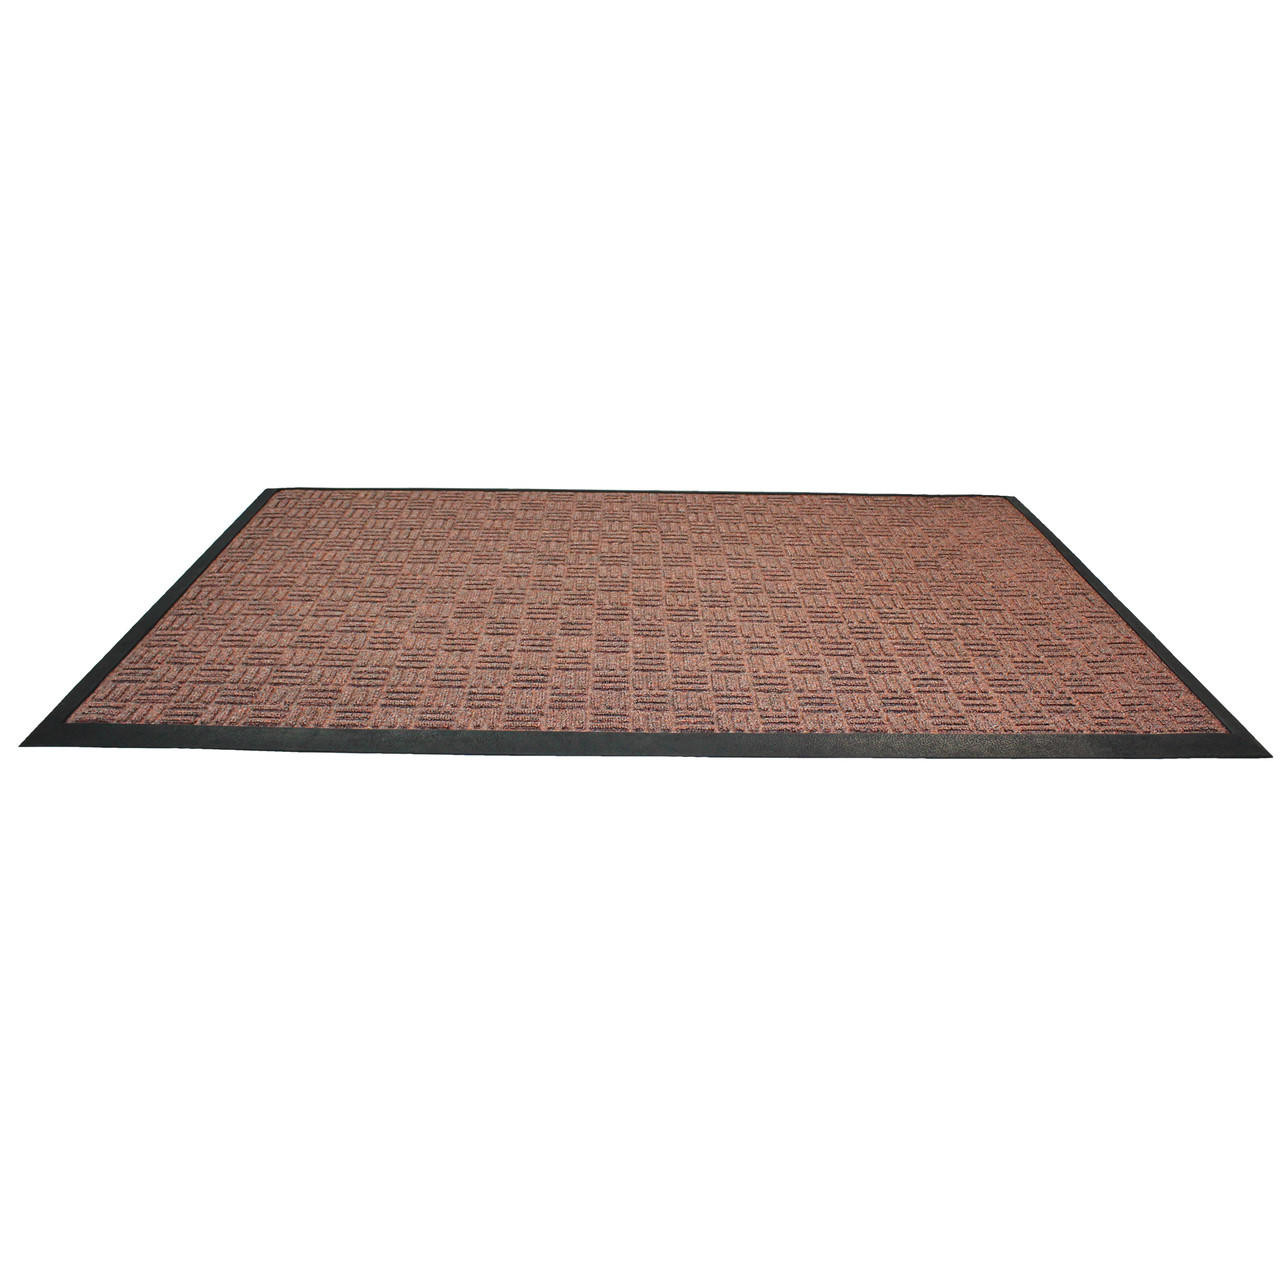 ULTRALUX Indoor Entrance Mat | 24” x 35” | Polypropylene Fibers and  Anti-Slip Vinyl Backed Entry Rug Doormat | Gray | Home or Office Use |  Multiple